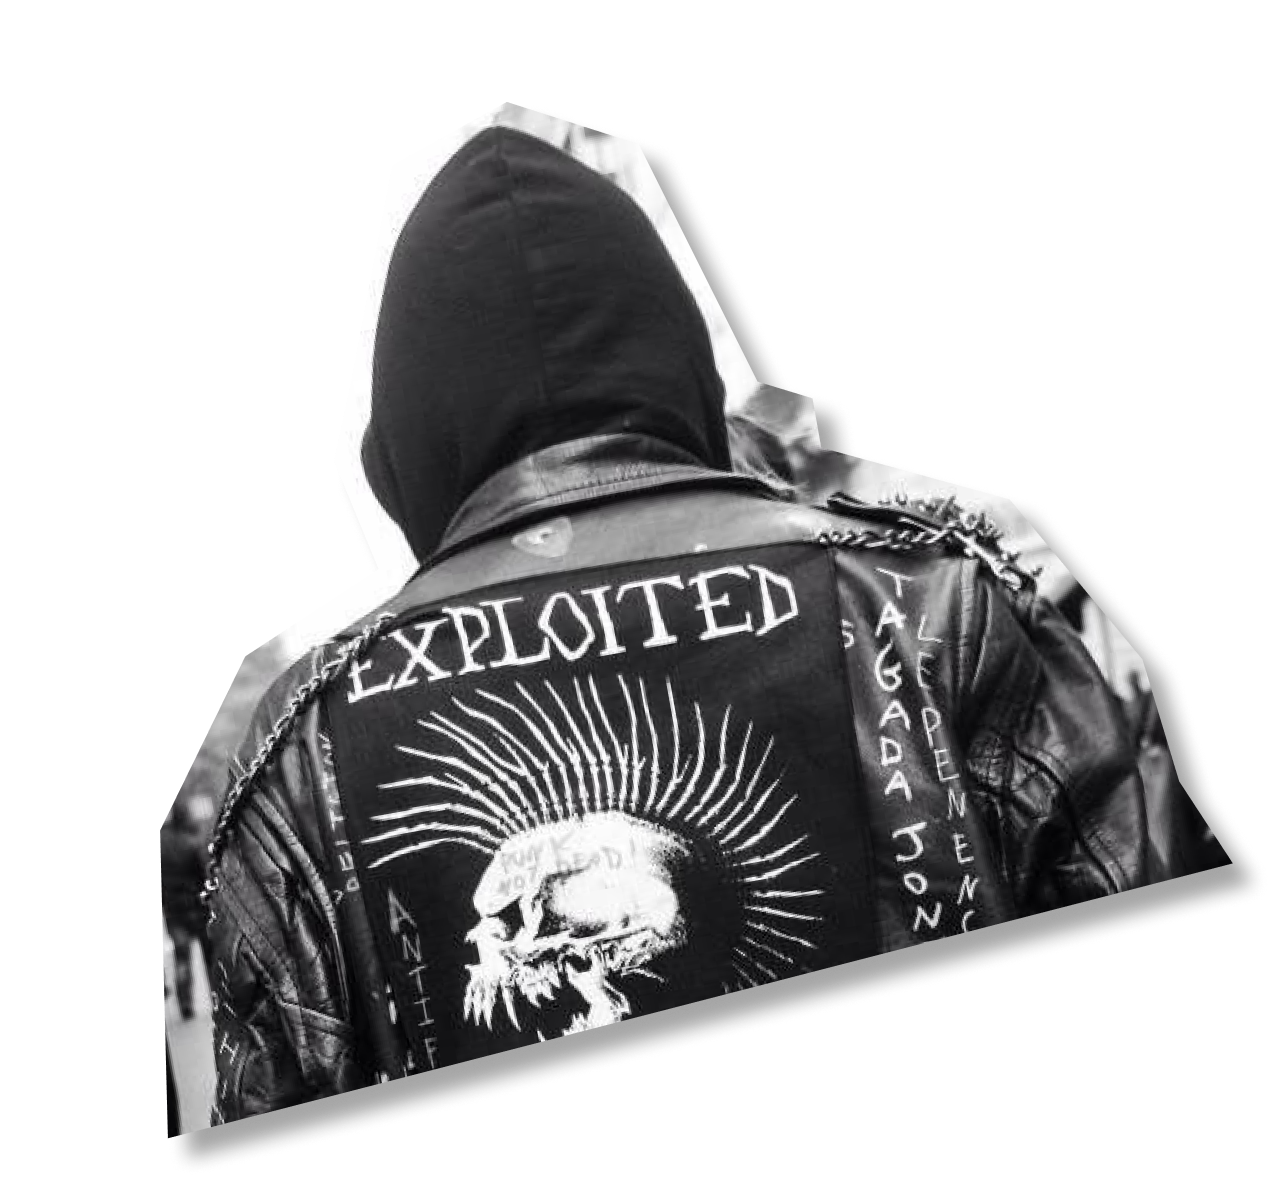 The back of a punk individual wearing a customized leather jacket with the word exploited and a skull with a mohawk.